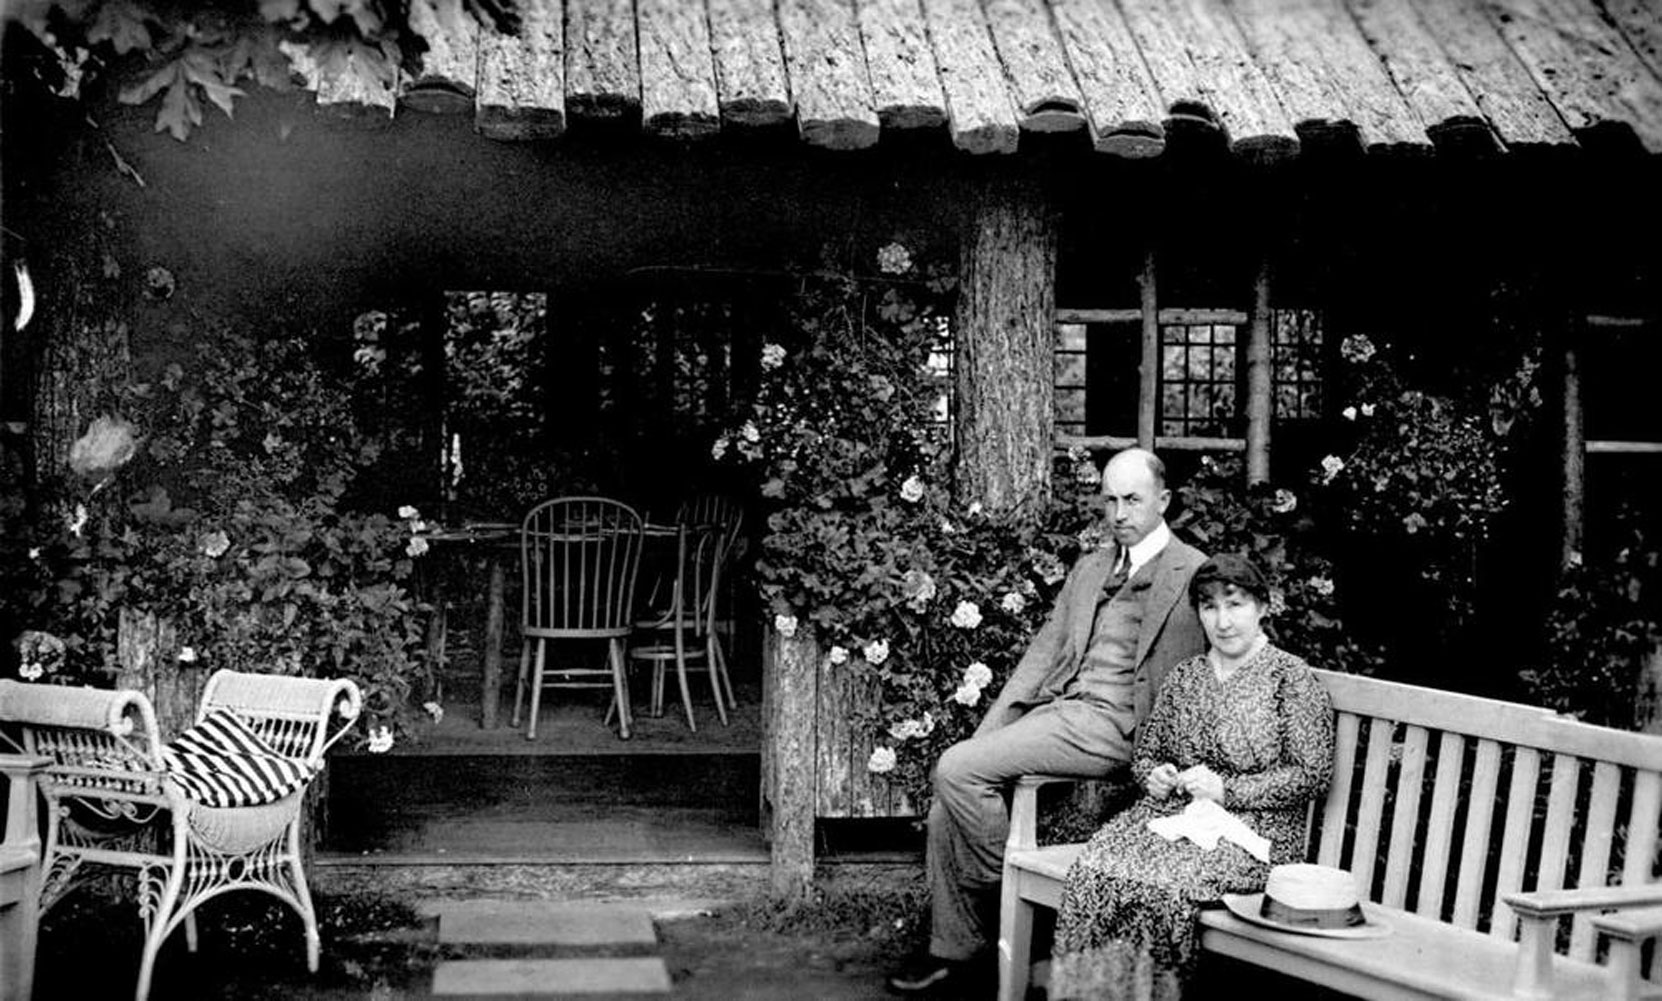 Jenny Butchart with her son in law William Todd at Benvenuto, circa 1920. The building in the background is likely the teahouse which once stood near the entrance to the Japanese Garden. [BC Archives photo E-04311]